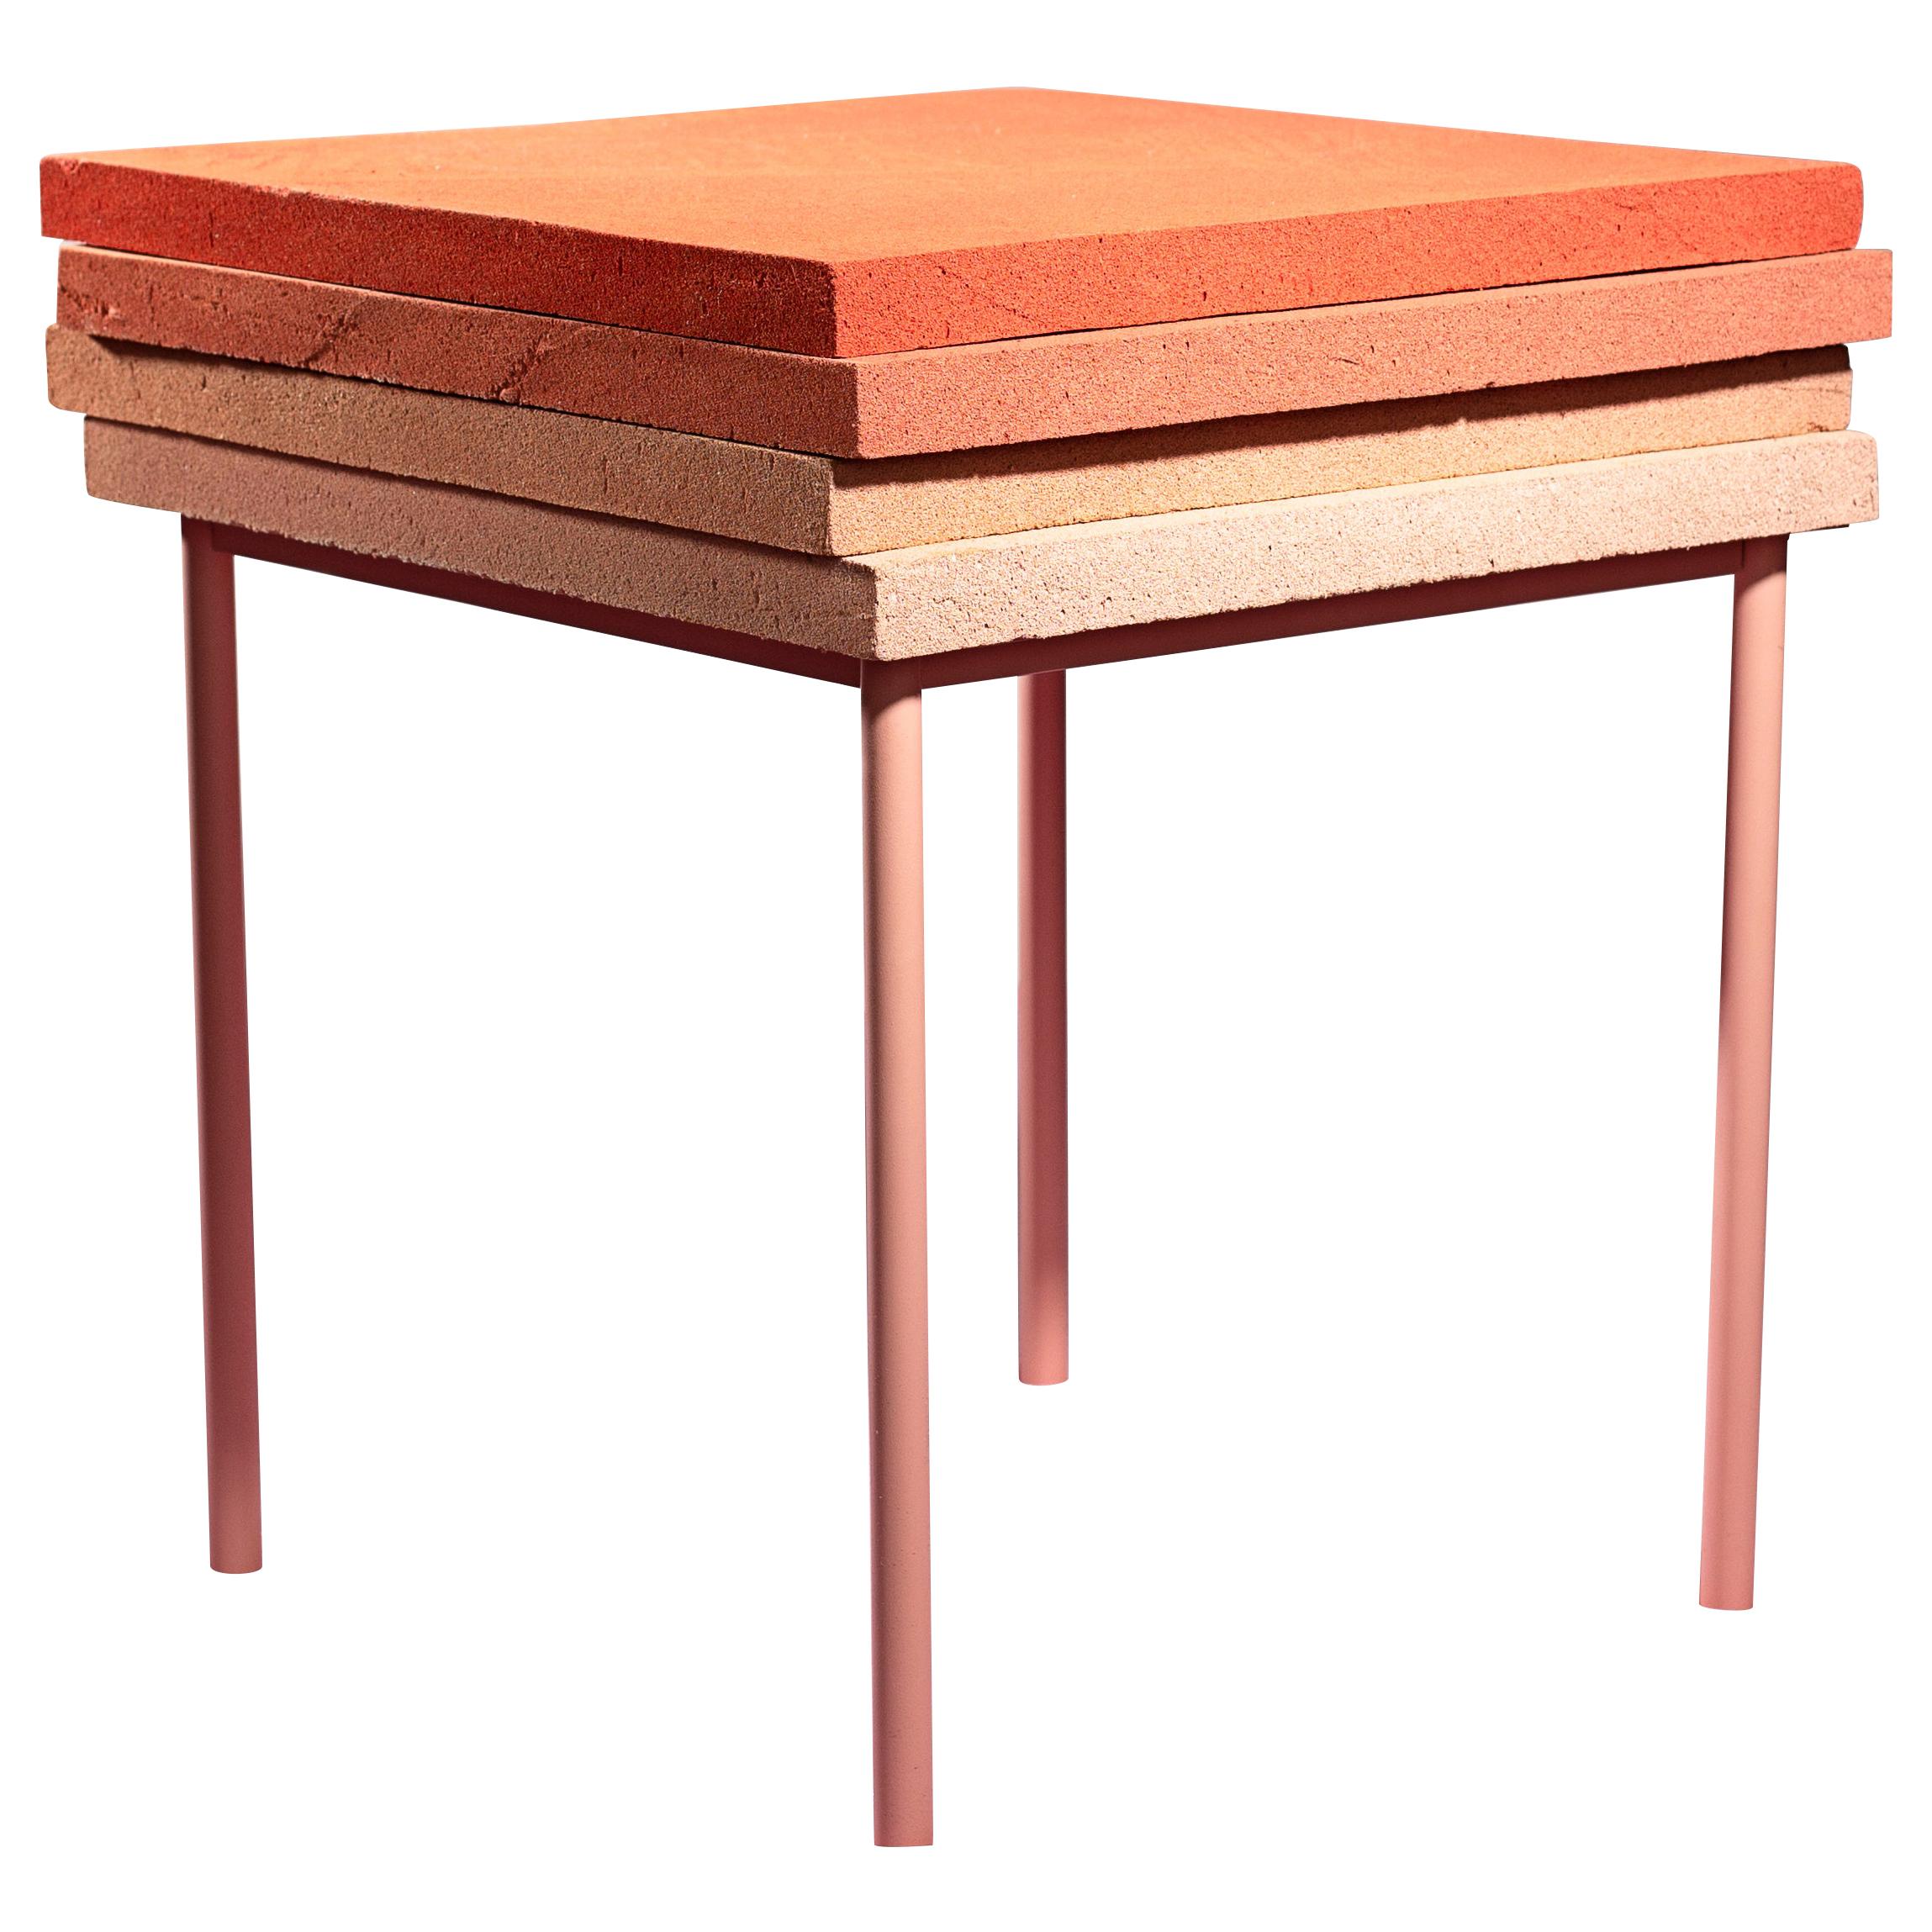 D33 - Support Table by Cultivado Em Casa